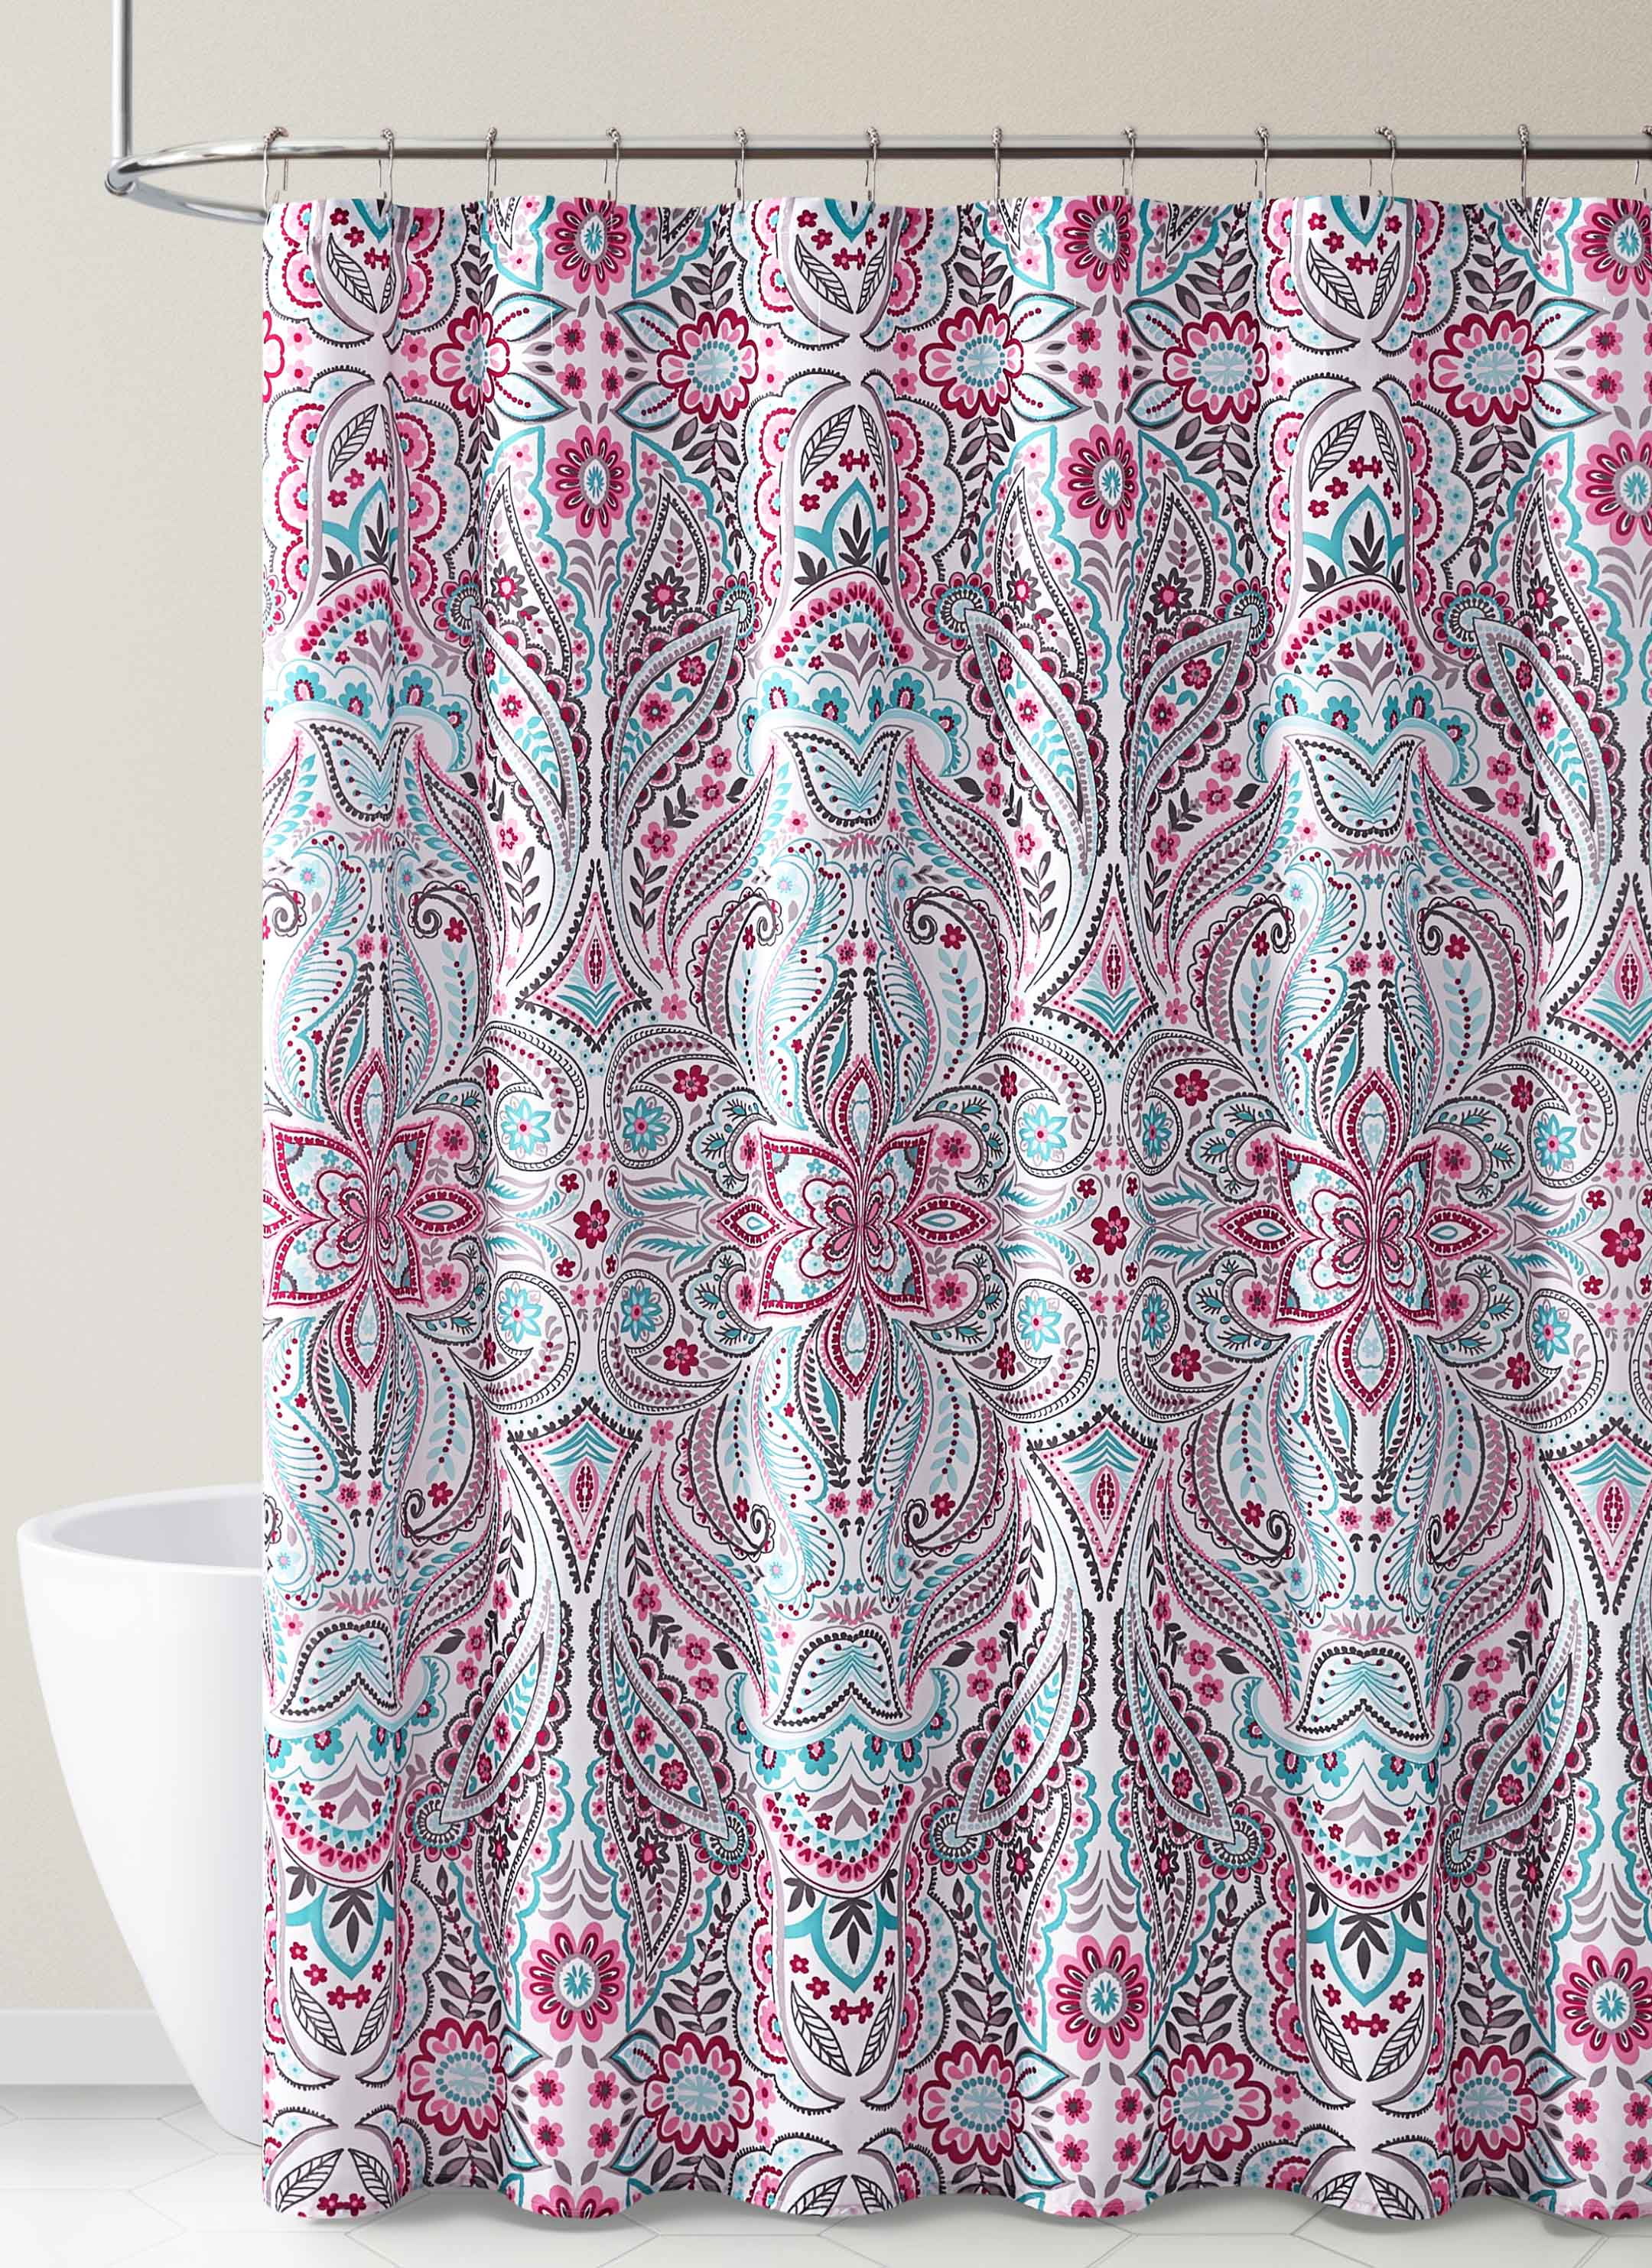 Fabric Shower Curtain for Bathroom White Gray Teal Pink Kaleidoscope Design 72L 